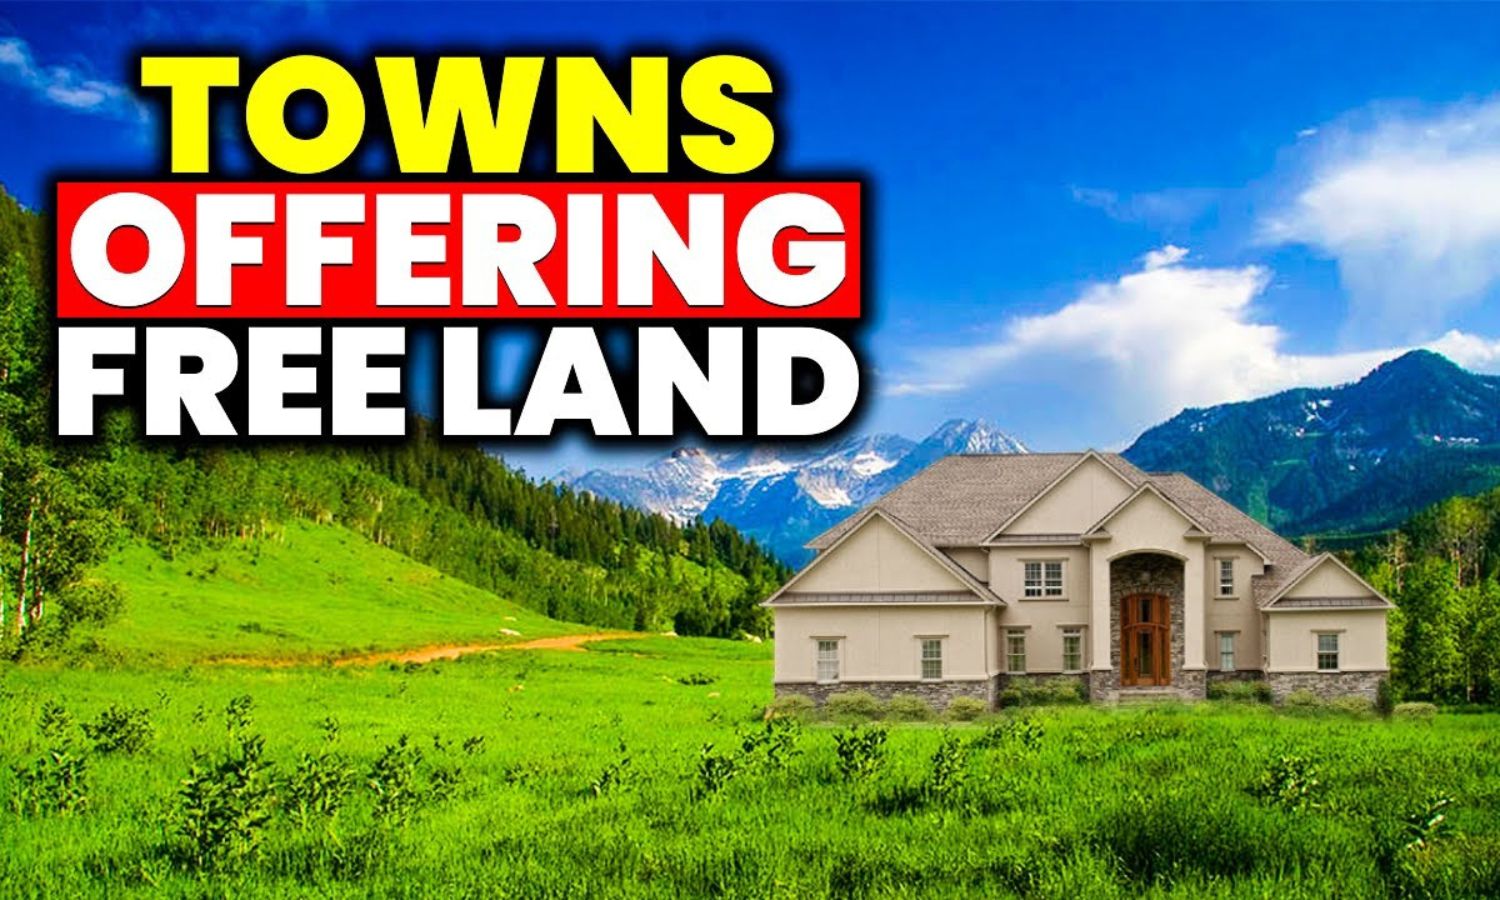 10 Towns Offering Free Land